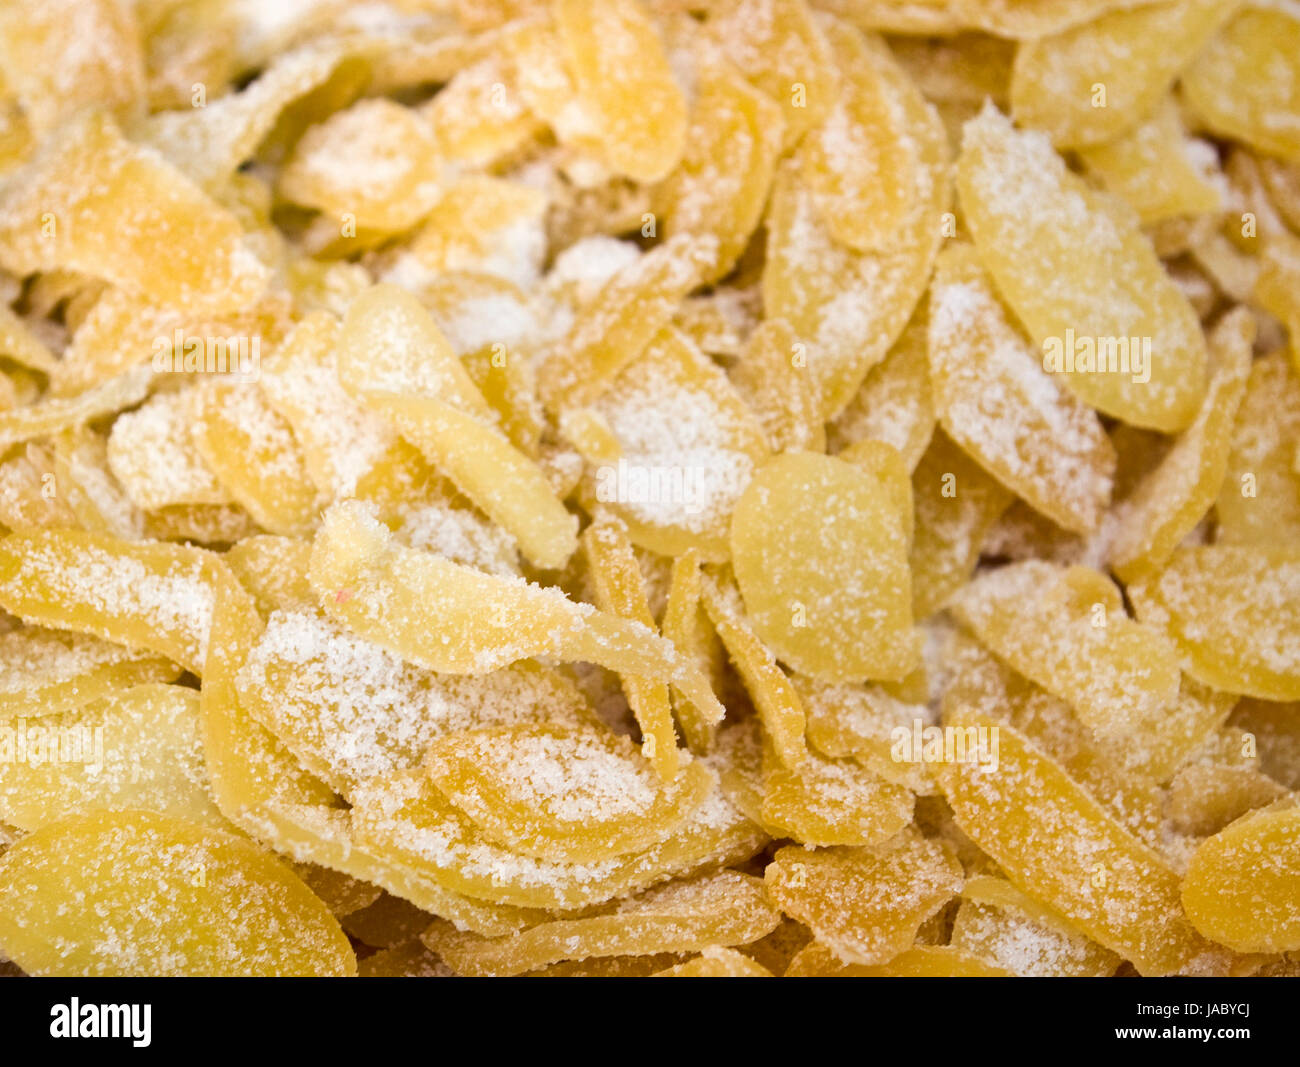 full frame detail of some dried and sugared fruits Stock Photo